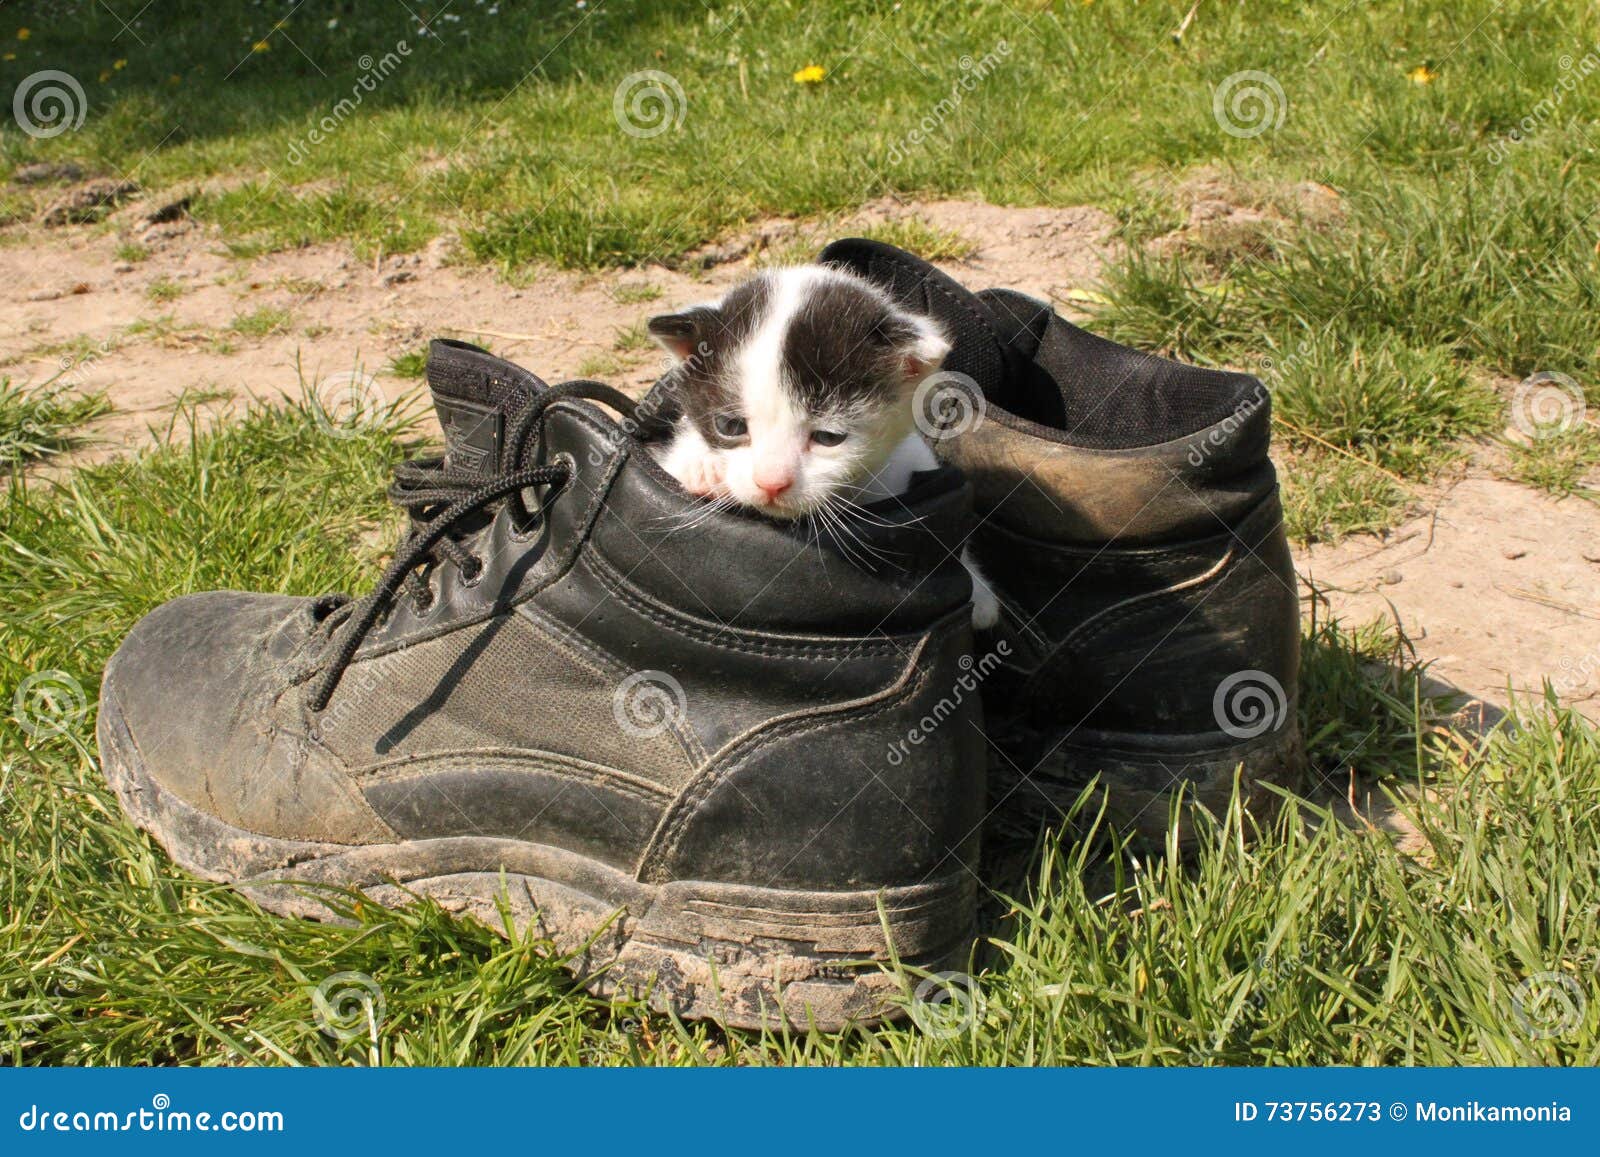 Baby Cat Sitting in Trekking Boots Stock Image - Image of young ...